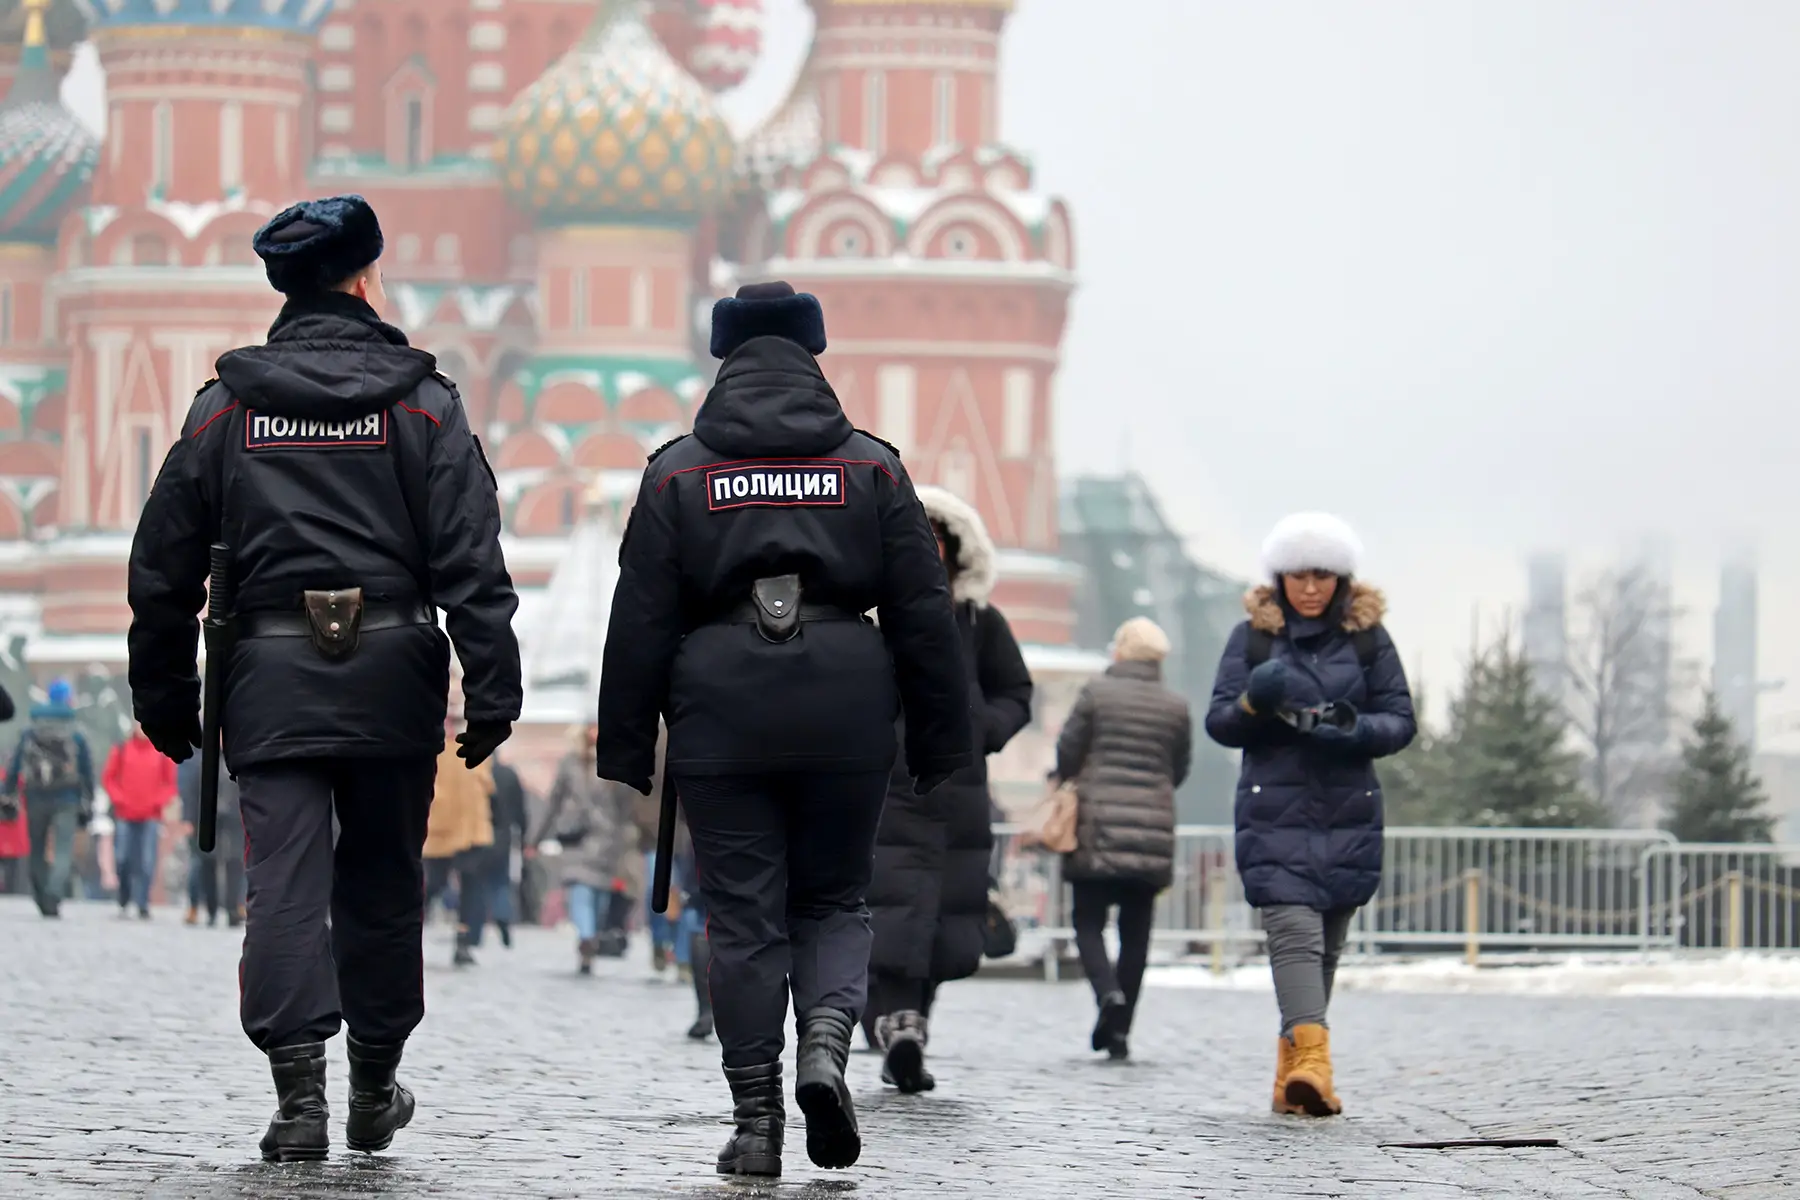 Police officers in Moscow